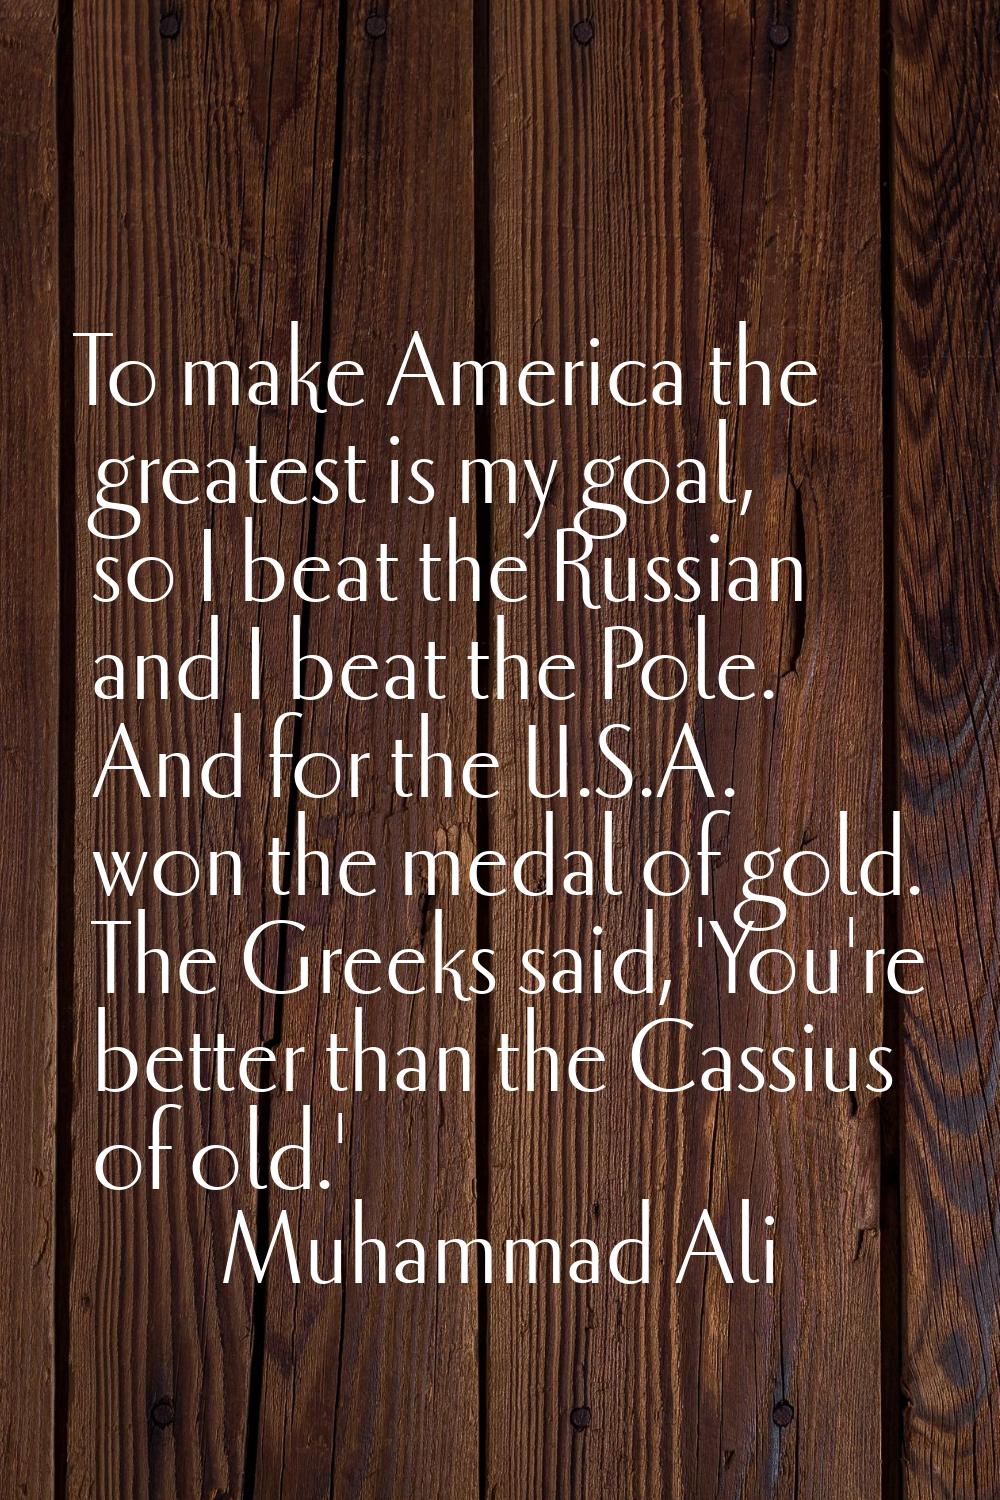 To make America the greatest is my goal, so I beat the Russian and I beat the Pole. And for the U.S